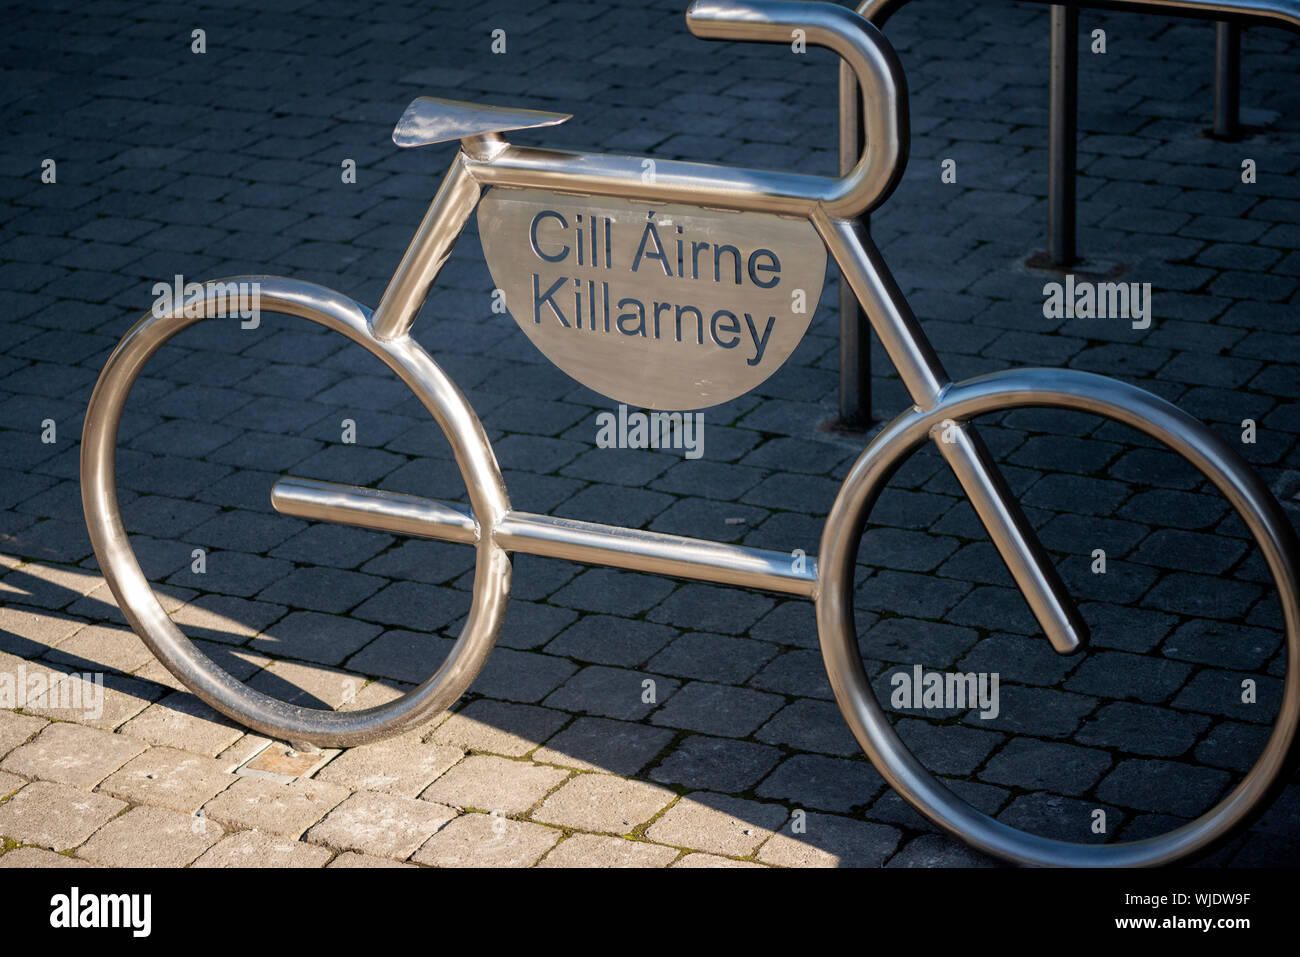 Innovative Killarney or Cill Airne iron chrome bicycle parking stand or bike racks in the shape of a bike. Urban environment detail. Stock Photo